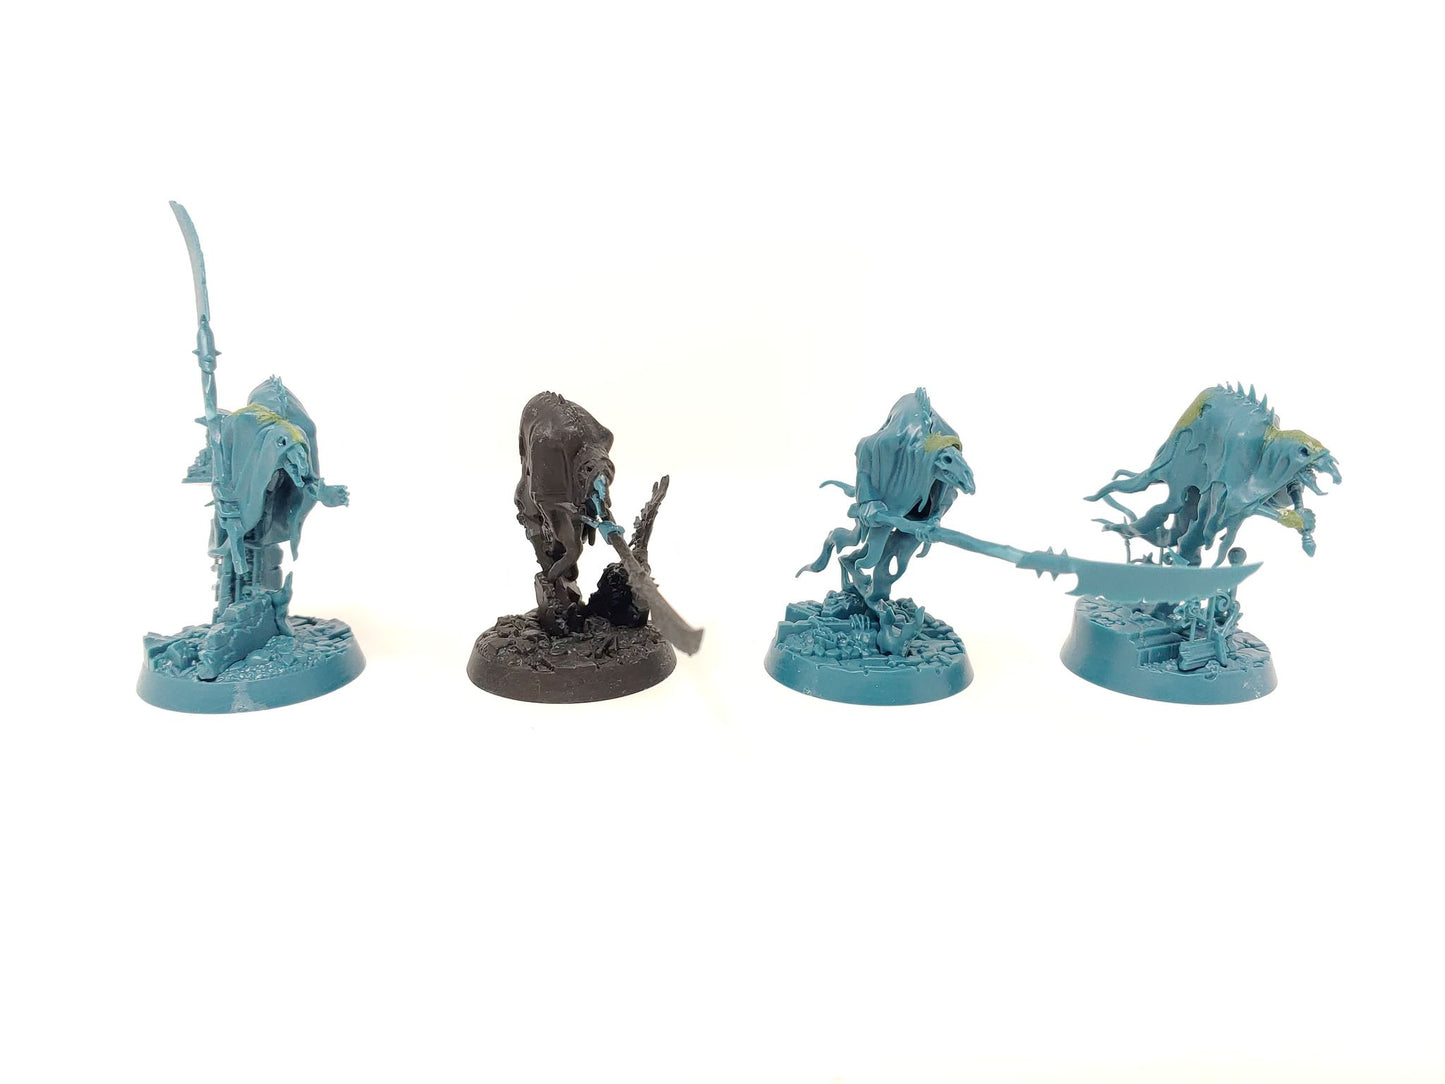 Warhammer Age of Sigmar: Glaivewraith Stalkers